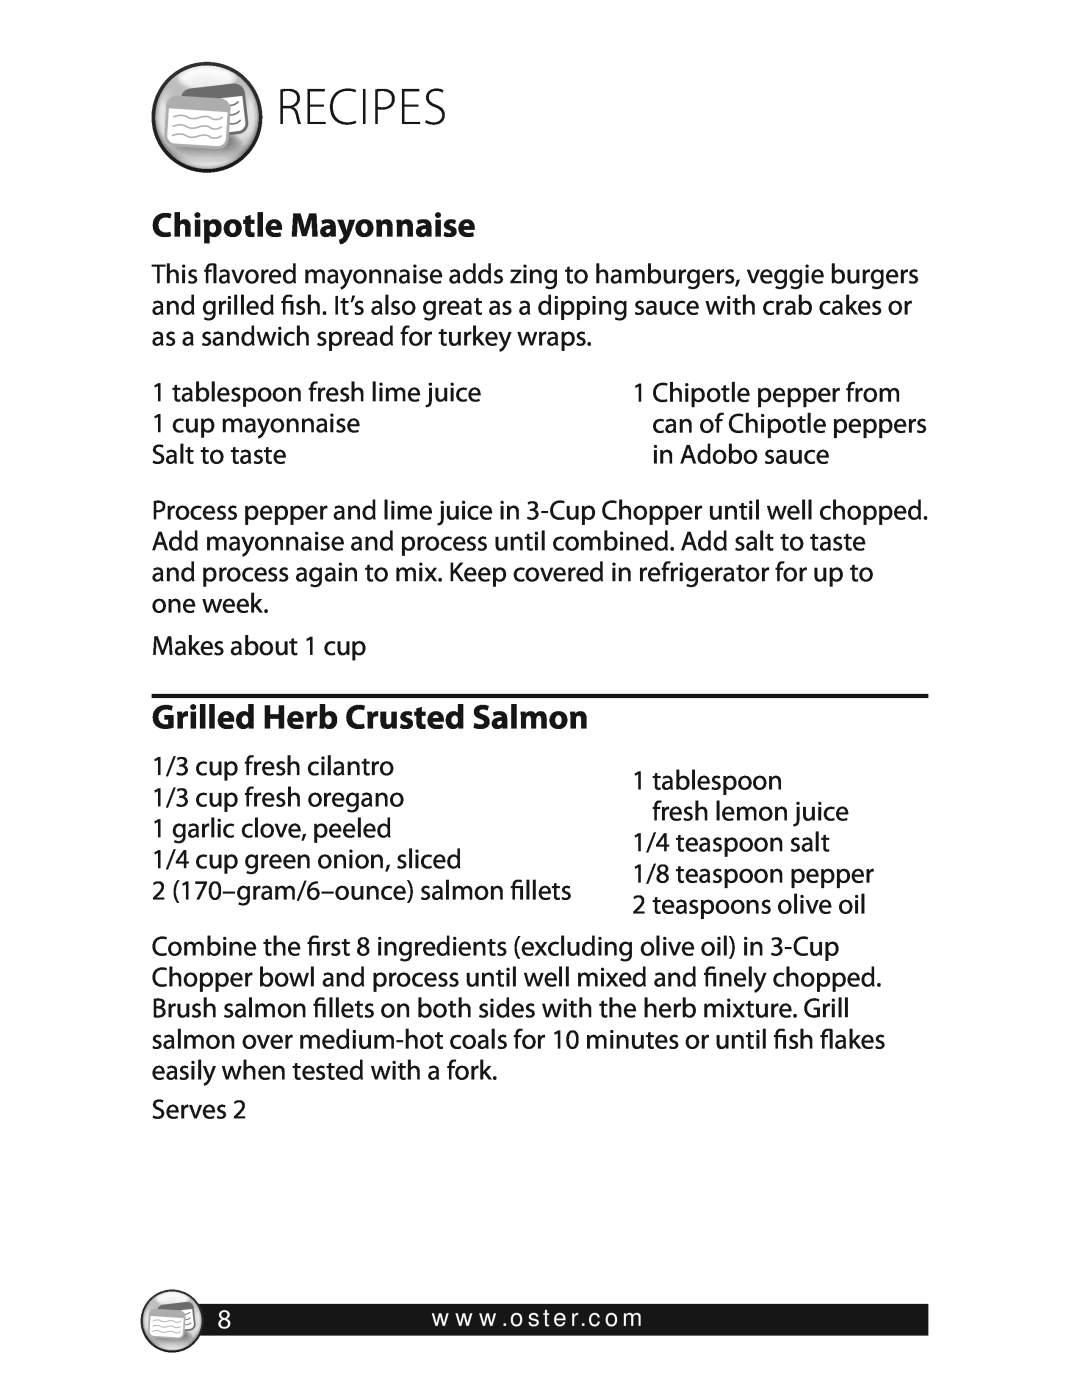 Oster 3320 warranty Recipes, Chipotle Mayonnaise, Grilled Herb Crusted Salmon 